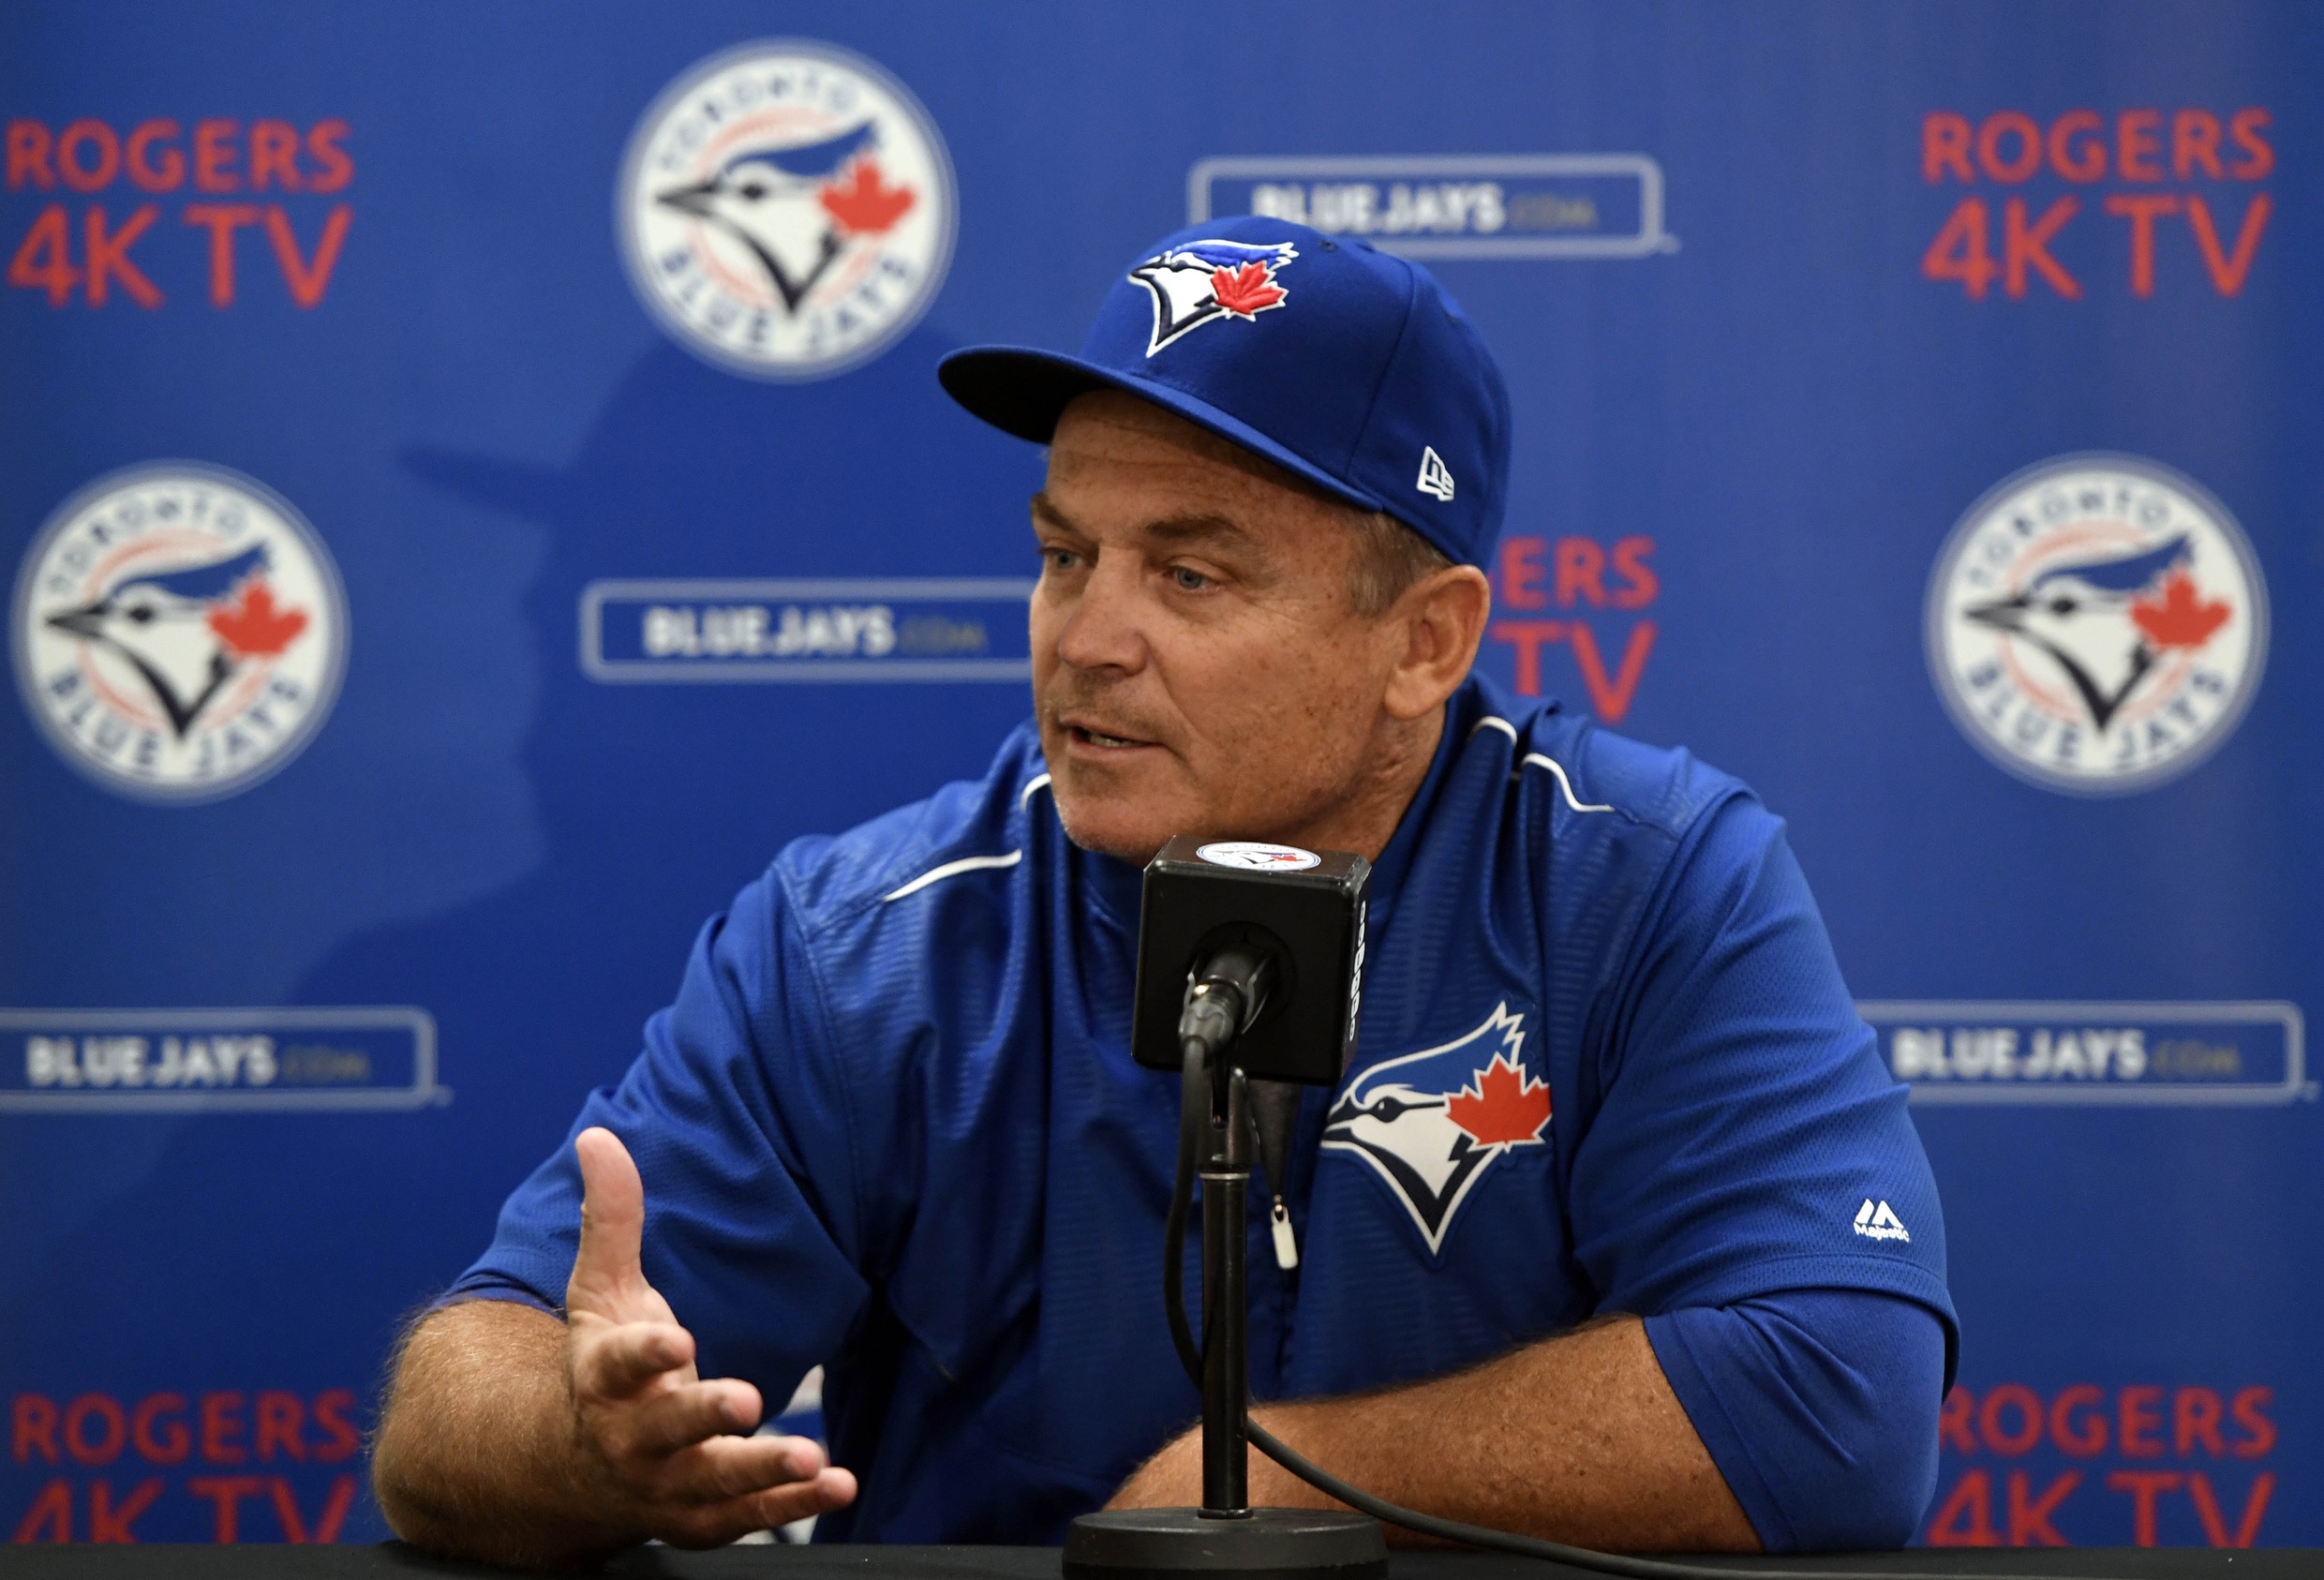 Apr 1, 2017; Montreal, Quebec, CAN; Toronto Blue Jays manager John Gibbons gives a press conference before the game against the Pittsburgh Pirates at Olympic Stadium. Mandatory Credit: Eric Bolte-USA TODAY Sports